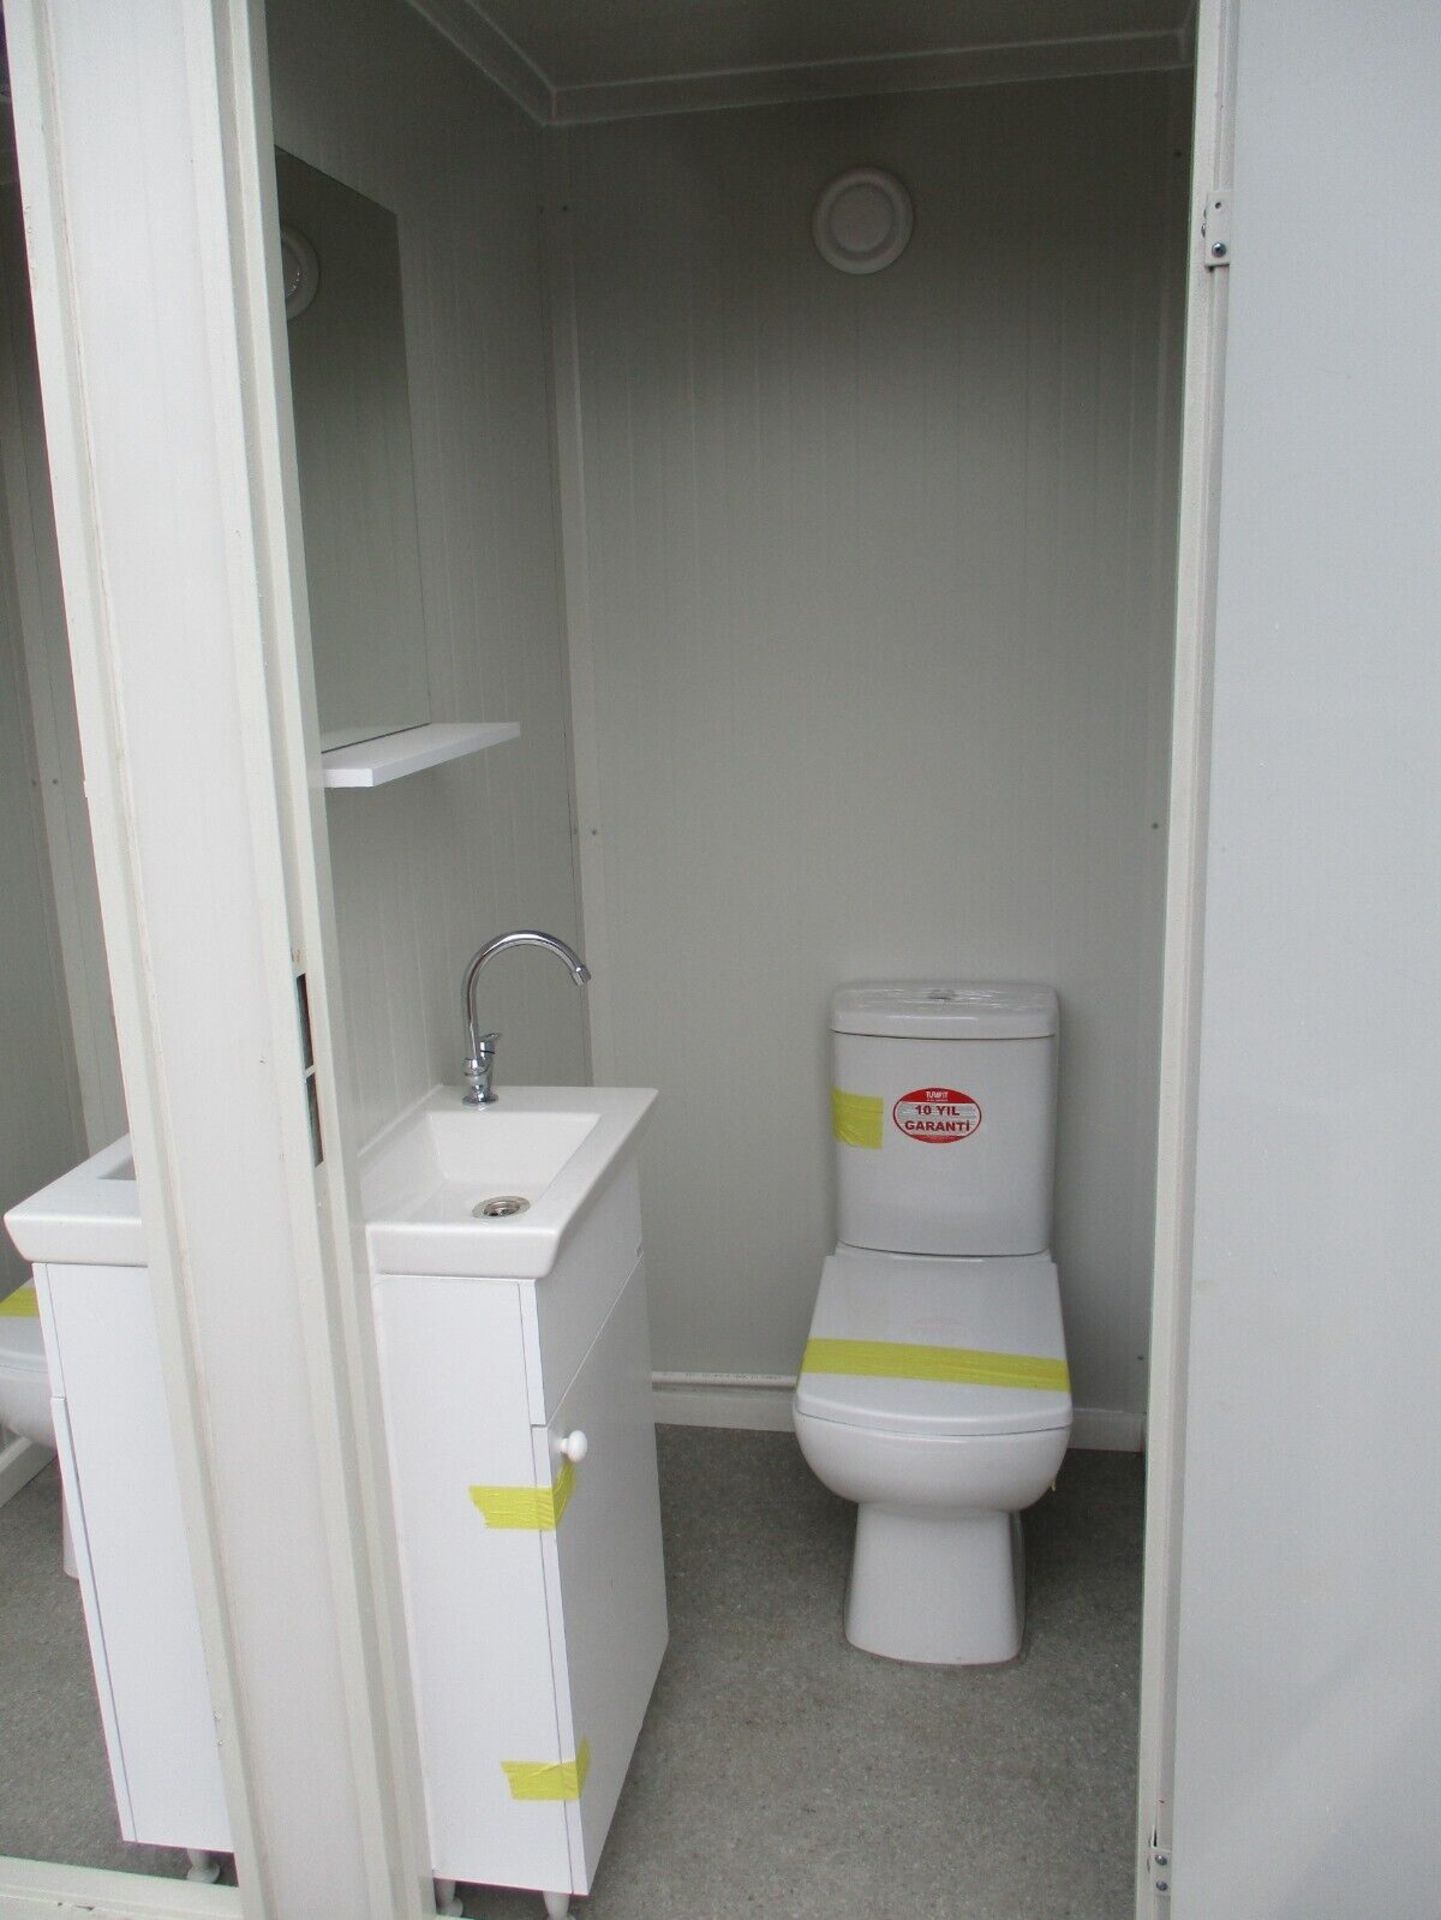 ADACON 2.1M X 1.35M DOUBLE TOILET BLOCK SECURE SHIPPING CONTAINER - Image 9 of 11